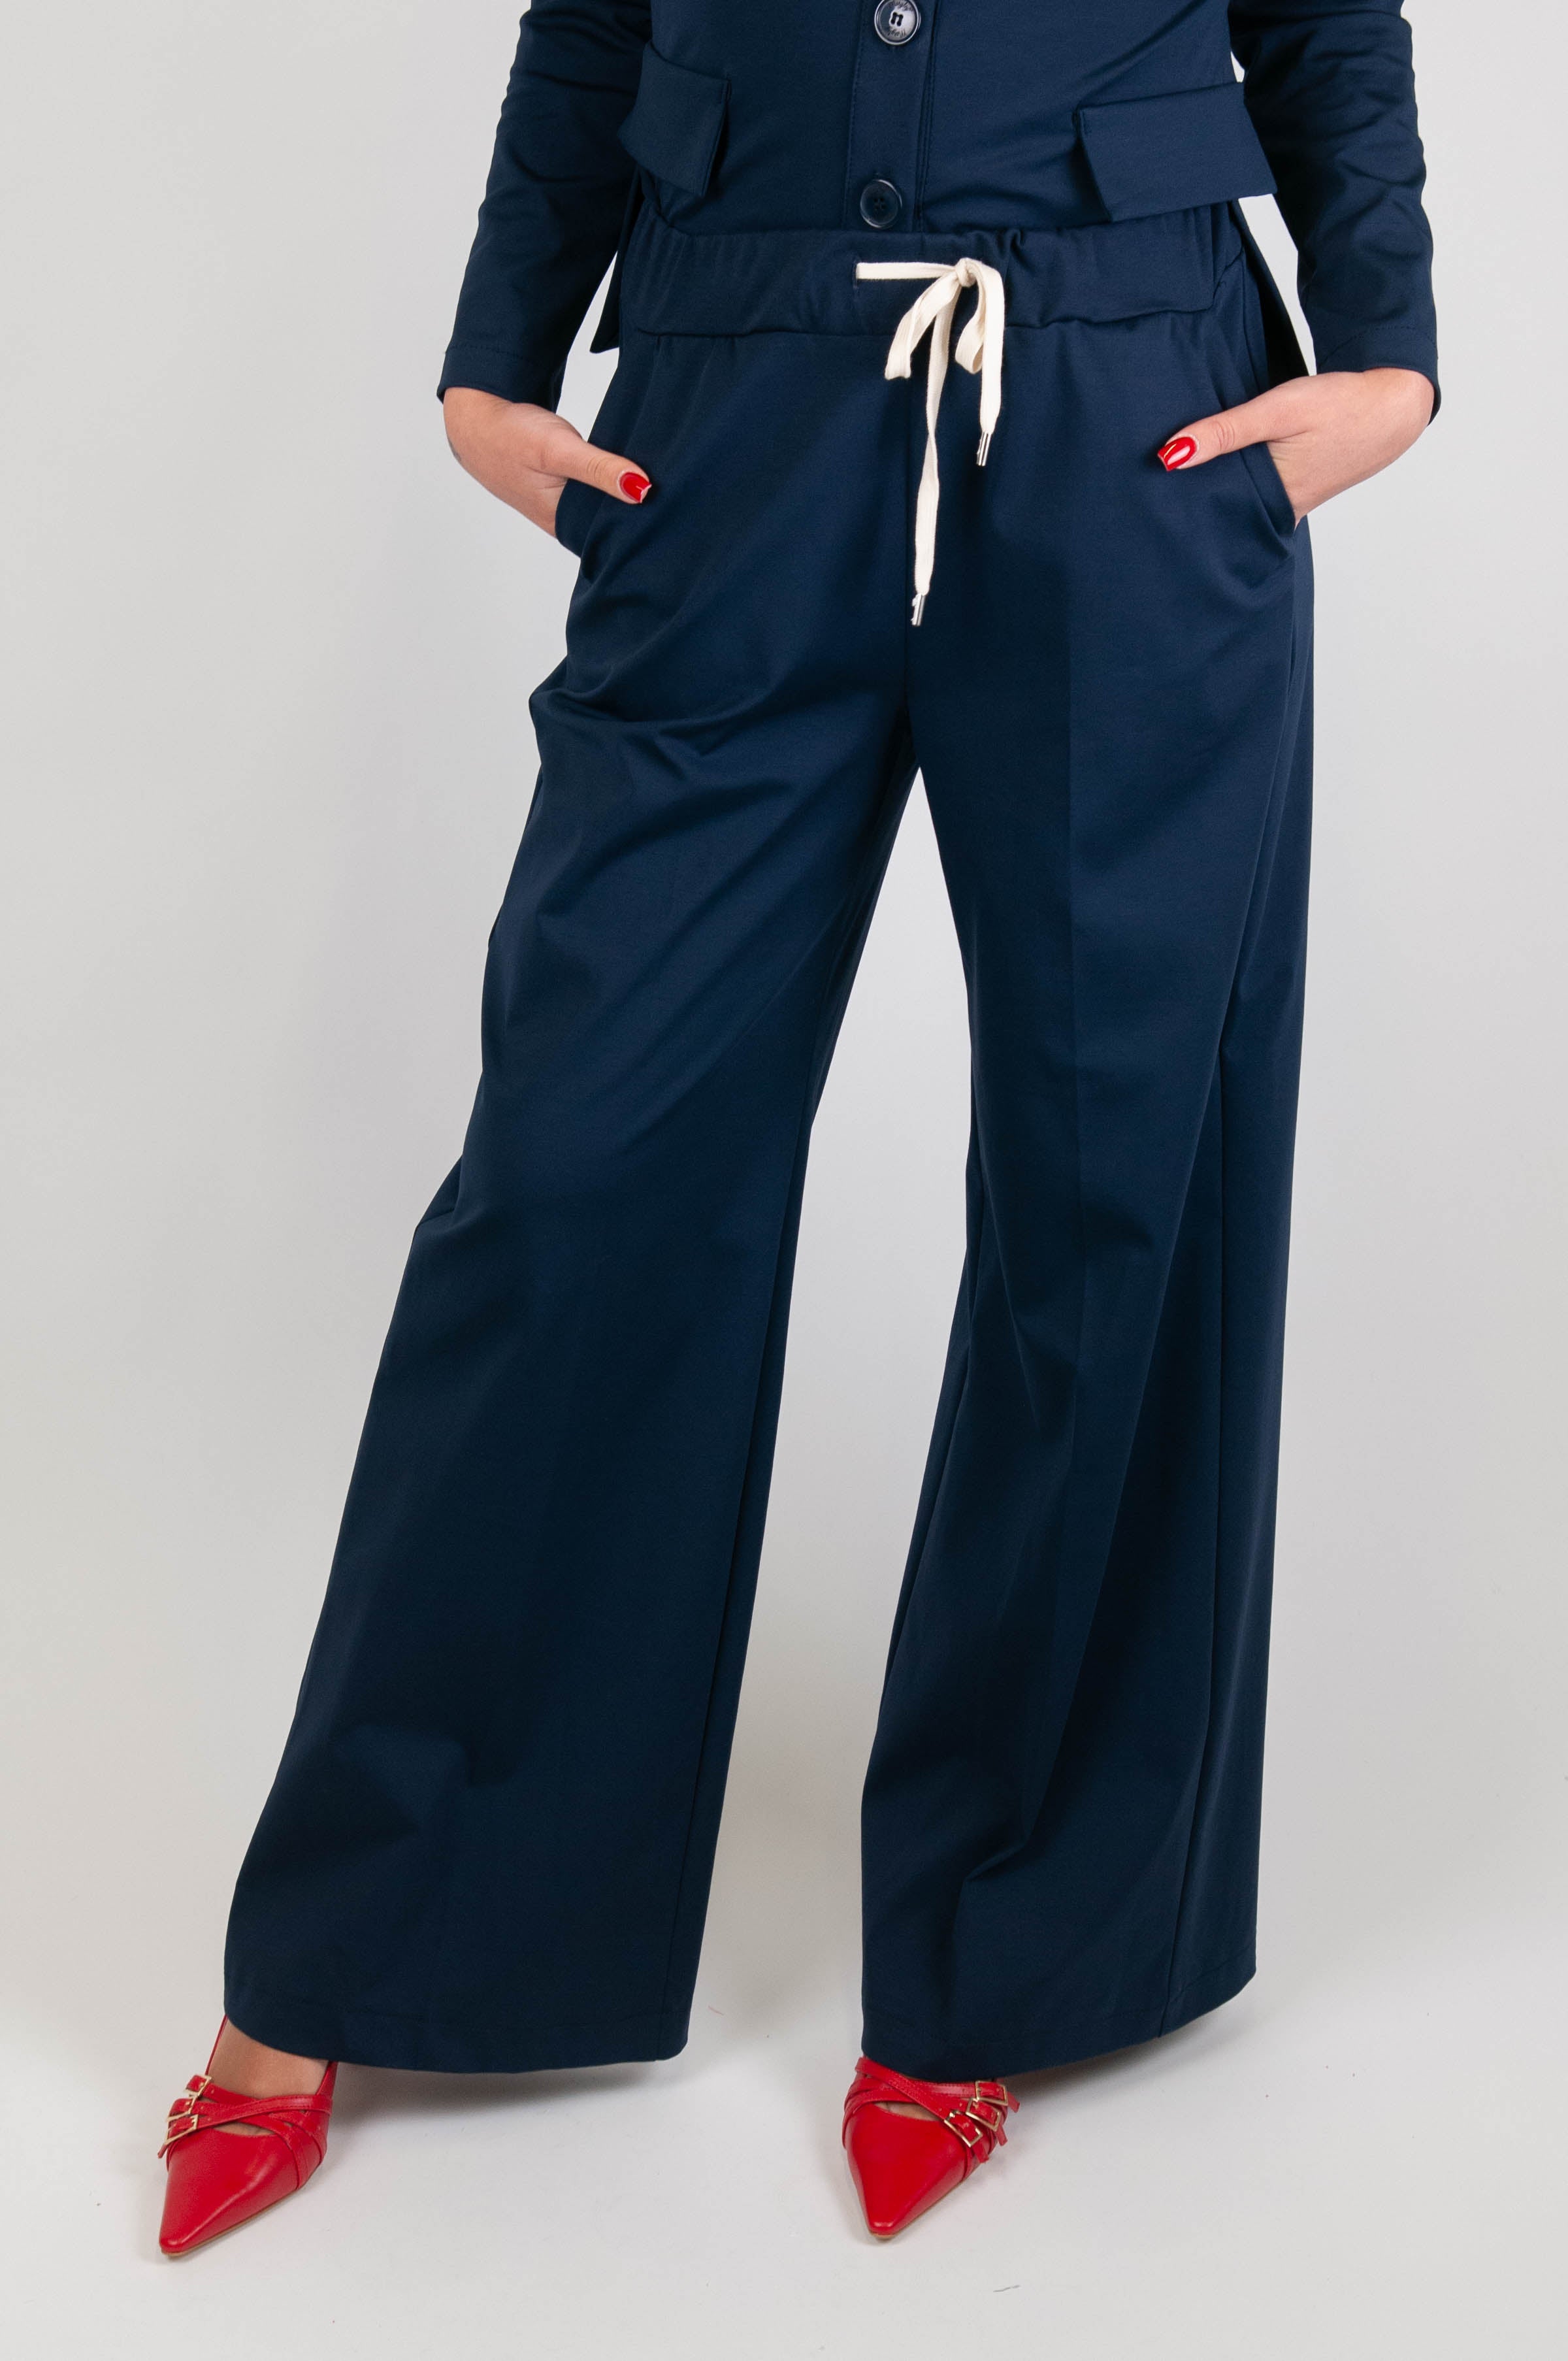 Maryley - Pantalone palazzo con coulisse in punto milano